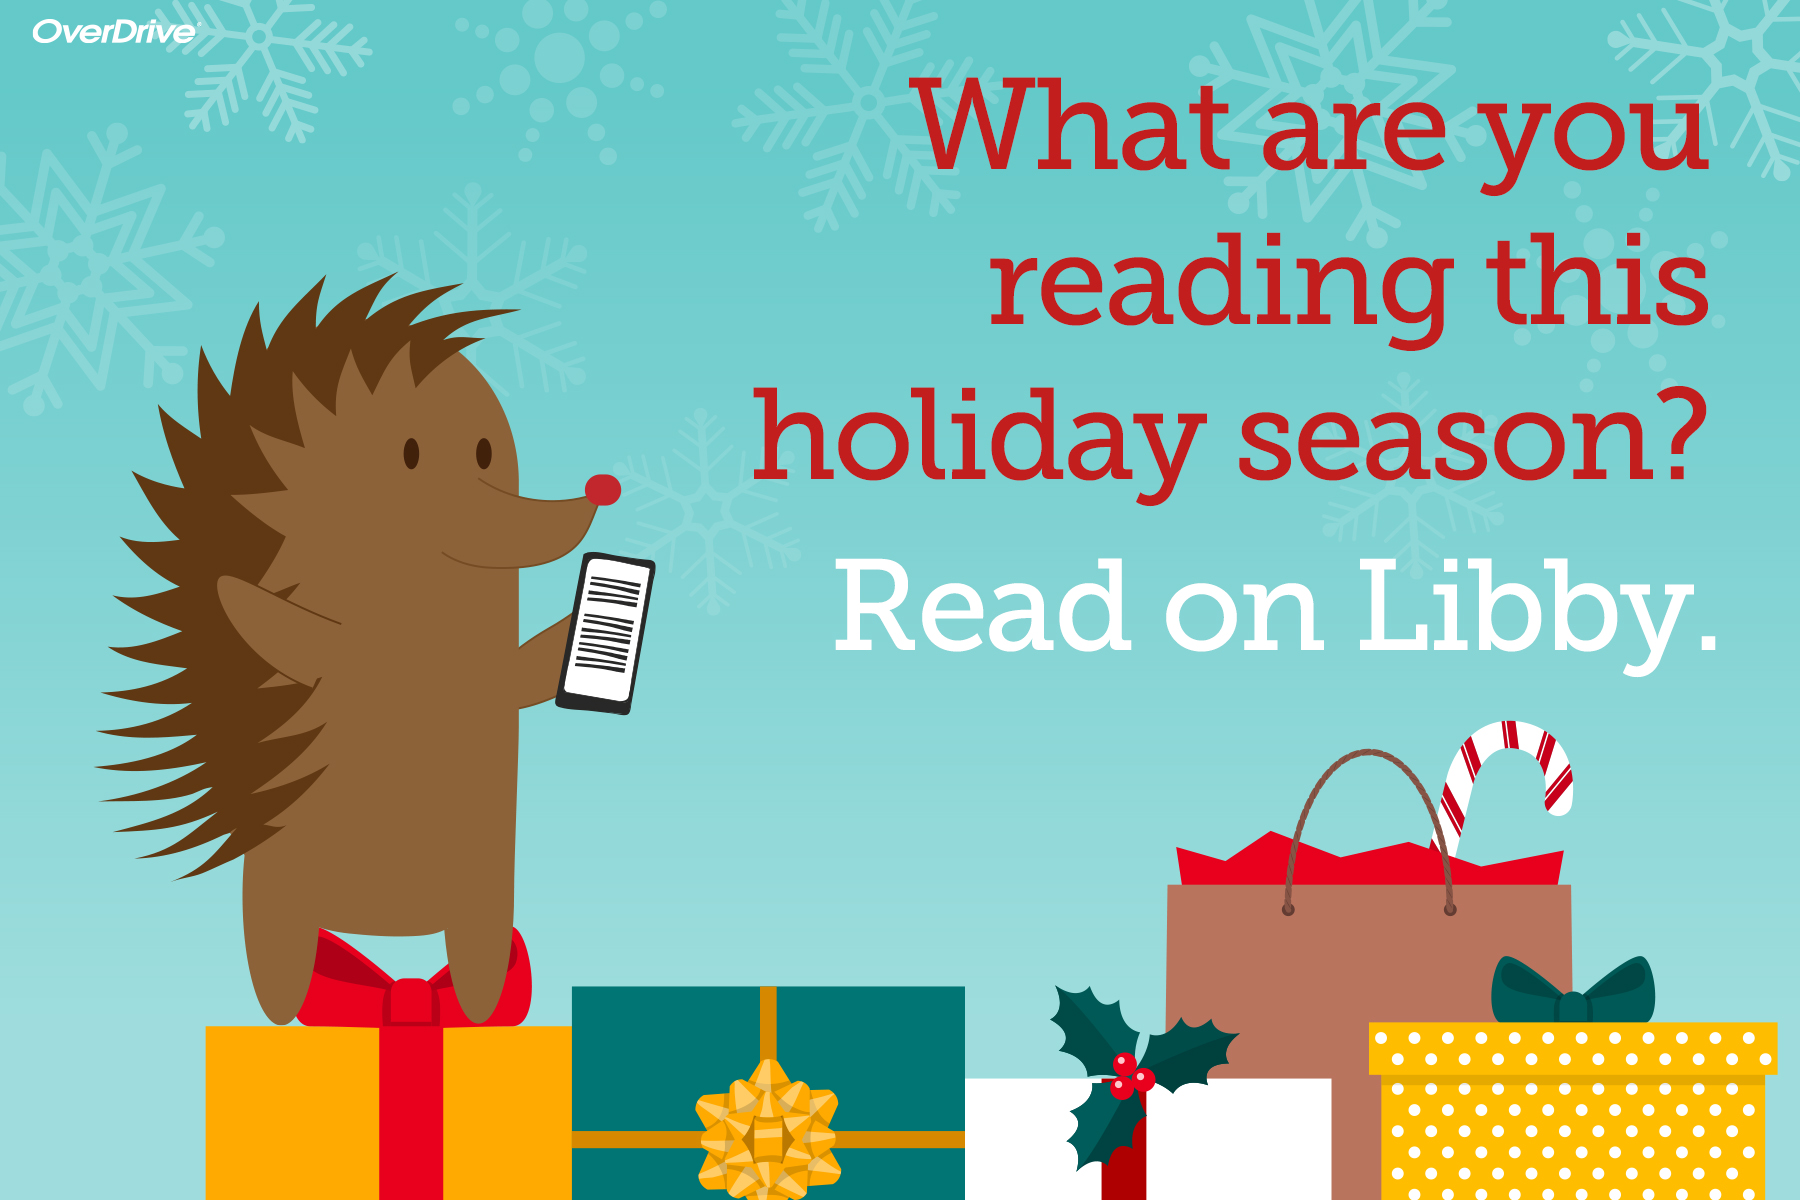 What are you reading this holiday season? Read on Libby.